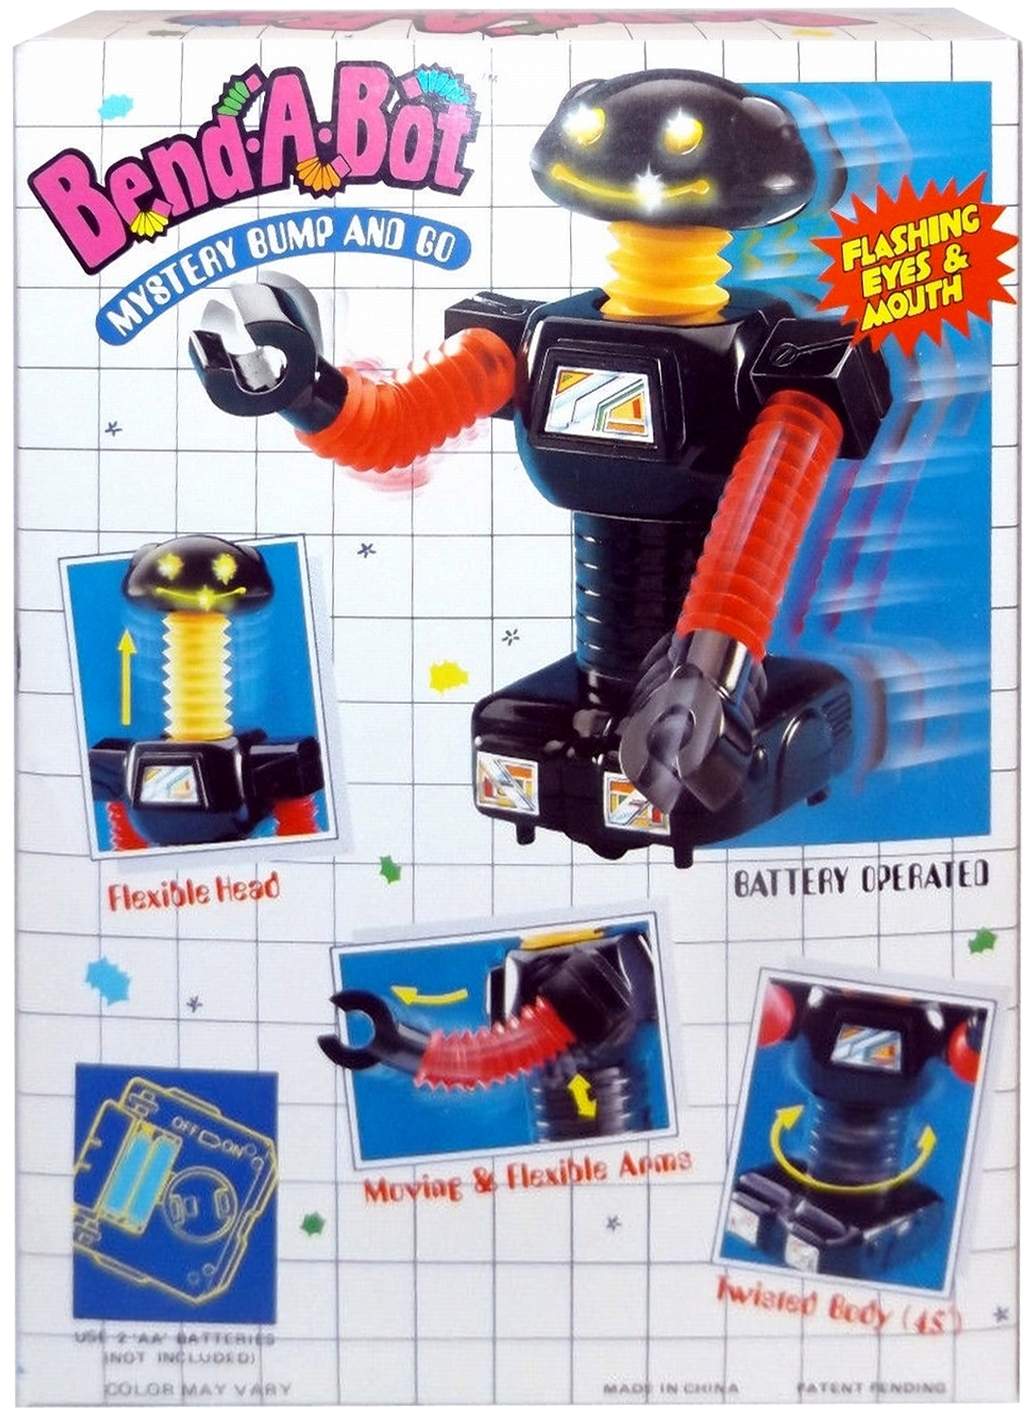 Vintage Battery Operated BEND-A-BOT ROBOT SPACE-BOT version MIB 1990's 